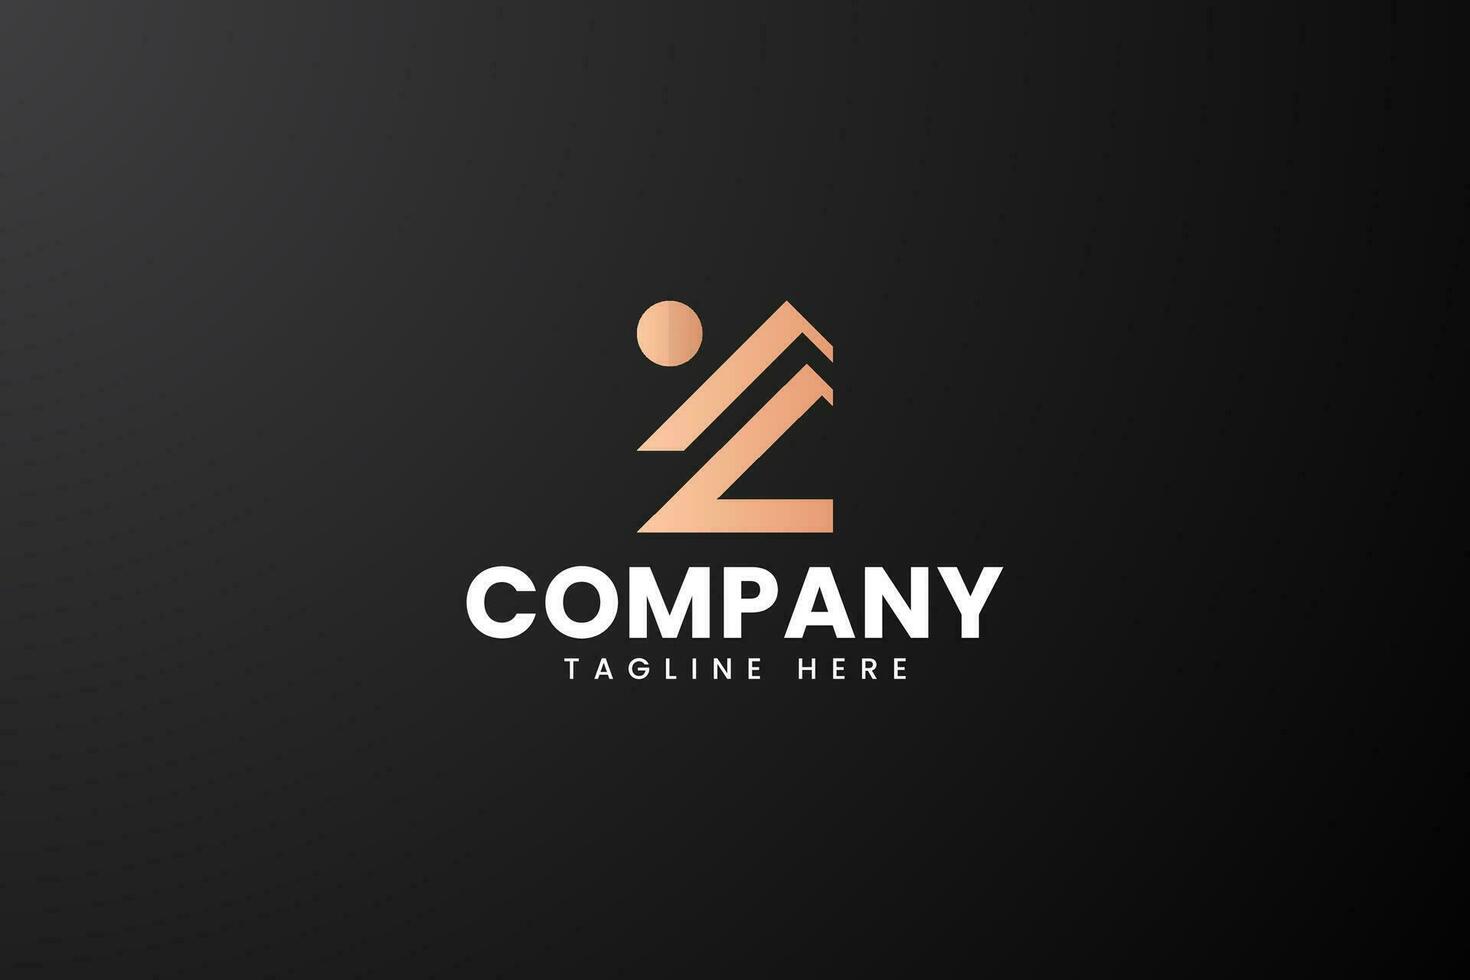 Z letter with home and sun shape logo design for mortgage property and construction company vector